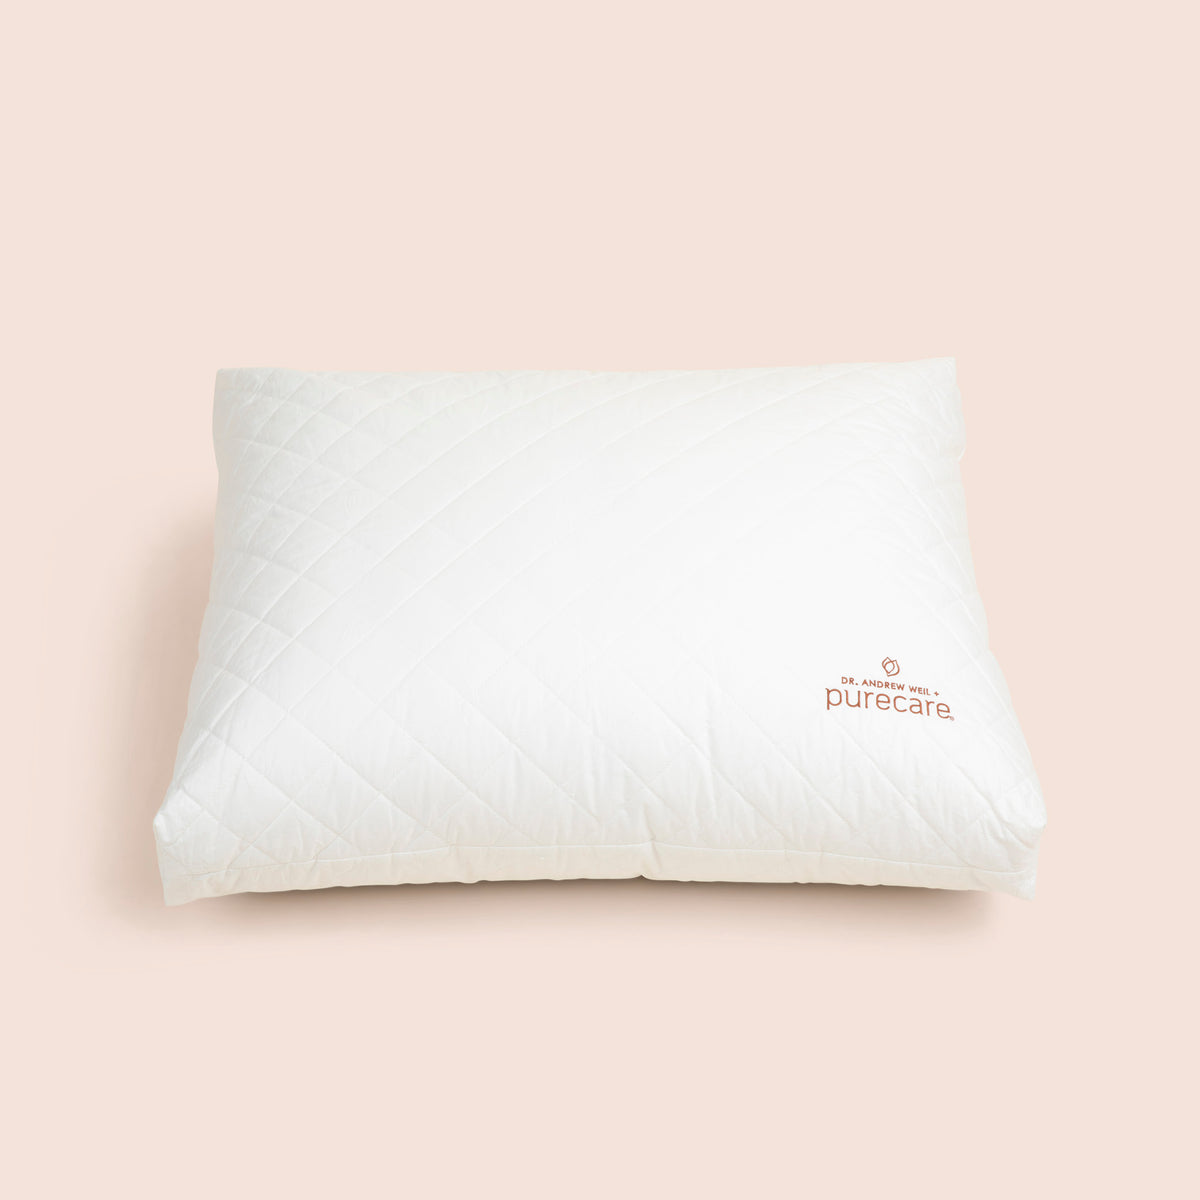 Image of a white, square Meditation Cushion shown from an top-angled view on a light pink background with the Dr. Andrew Weil + Purecare logo sewn on in the bottom right corner